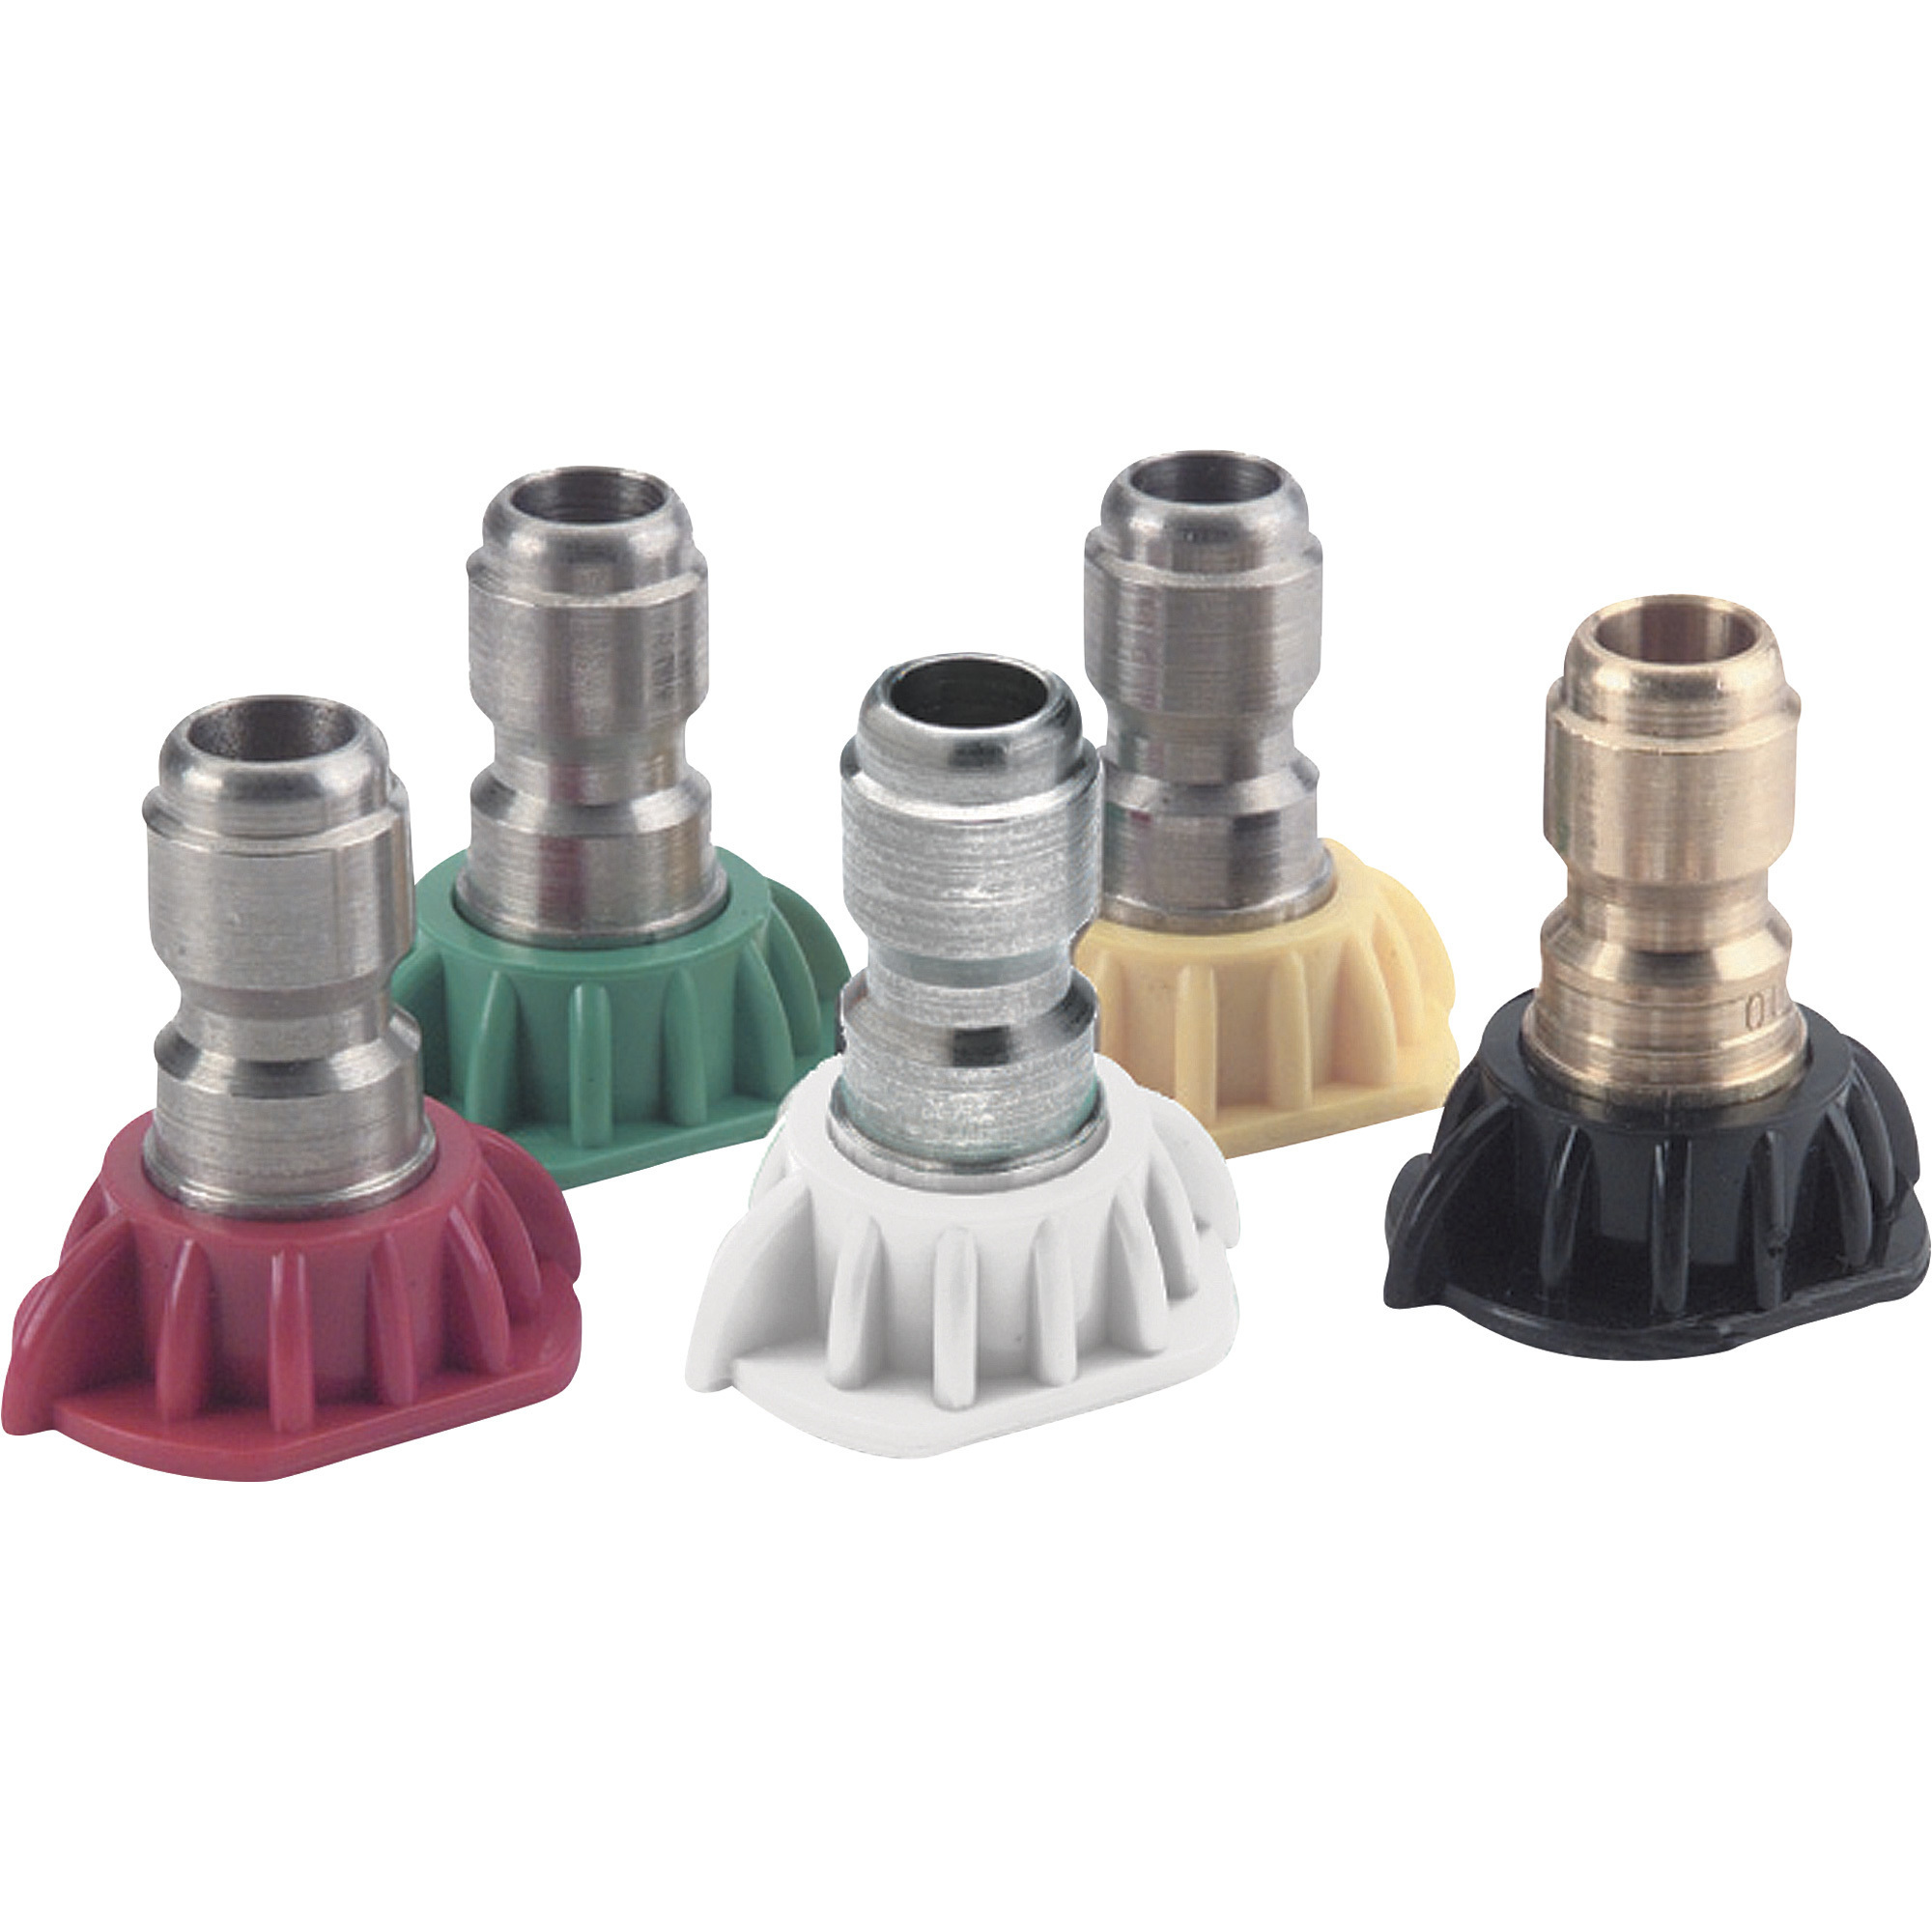 NorthStar 5-Pack Pressure Washer Quick Couple Nozzle Set â 4.5 Size, Model N105085P